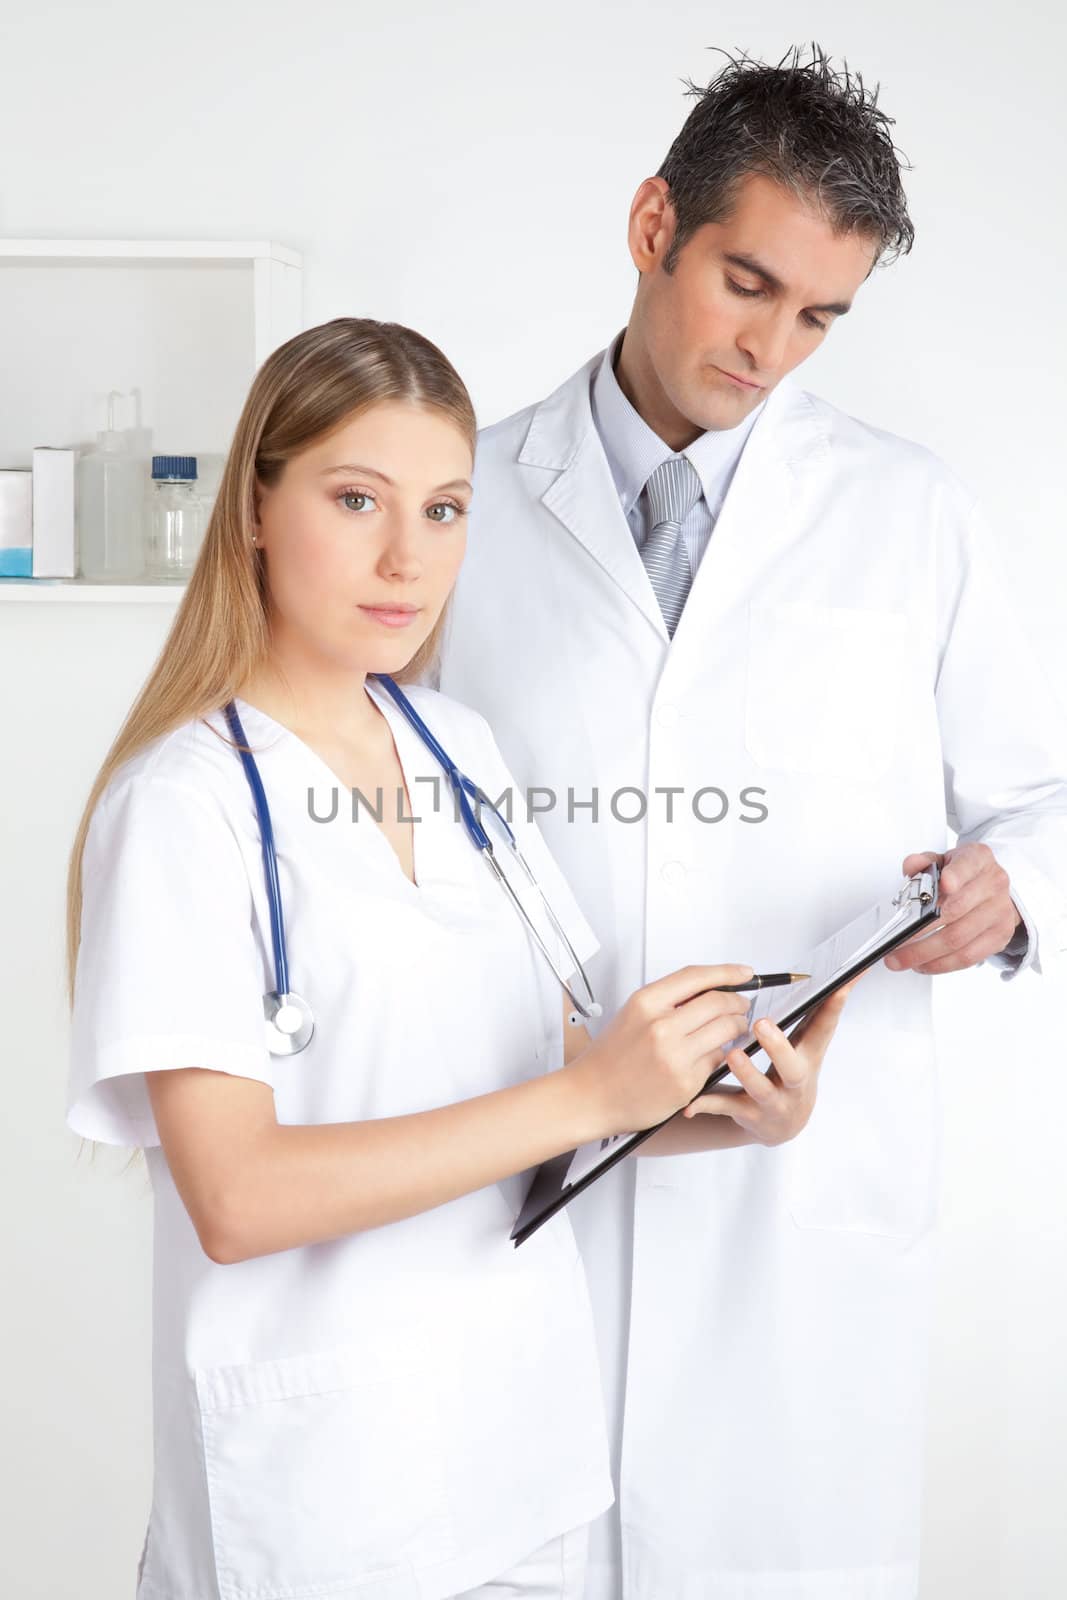 Female doctor showing clipboard to the male doctor.